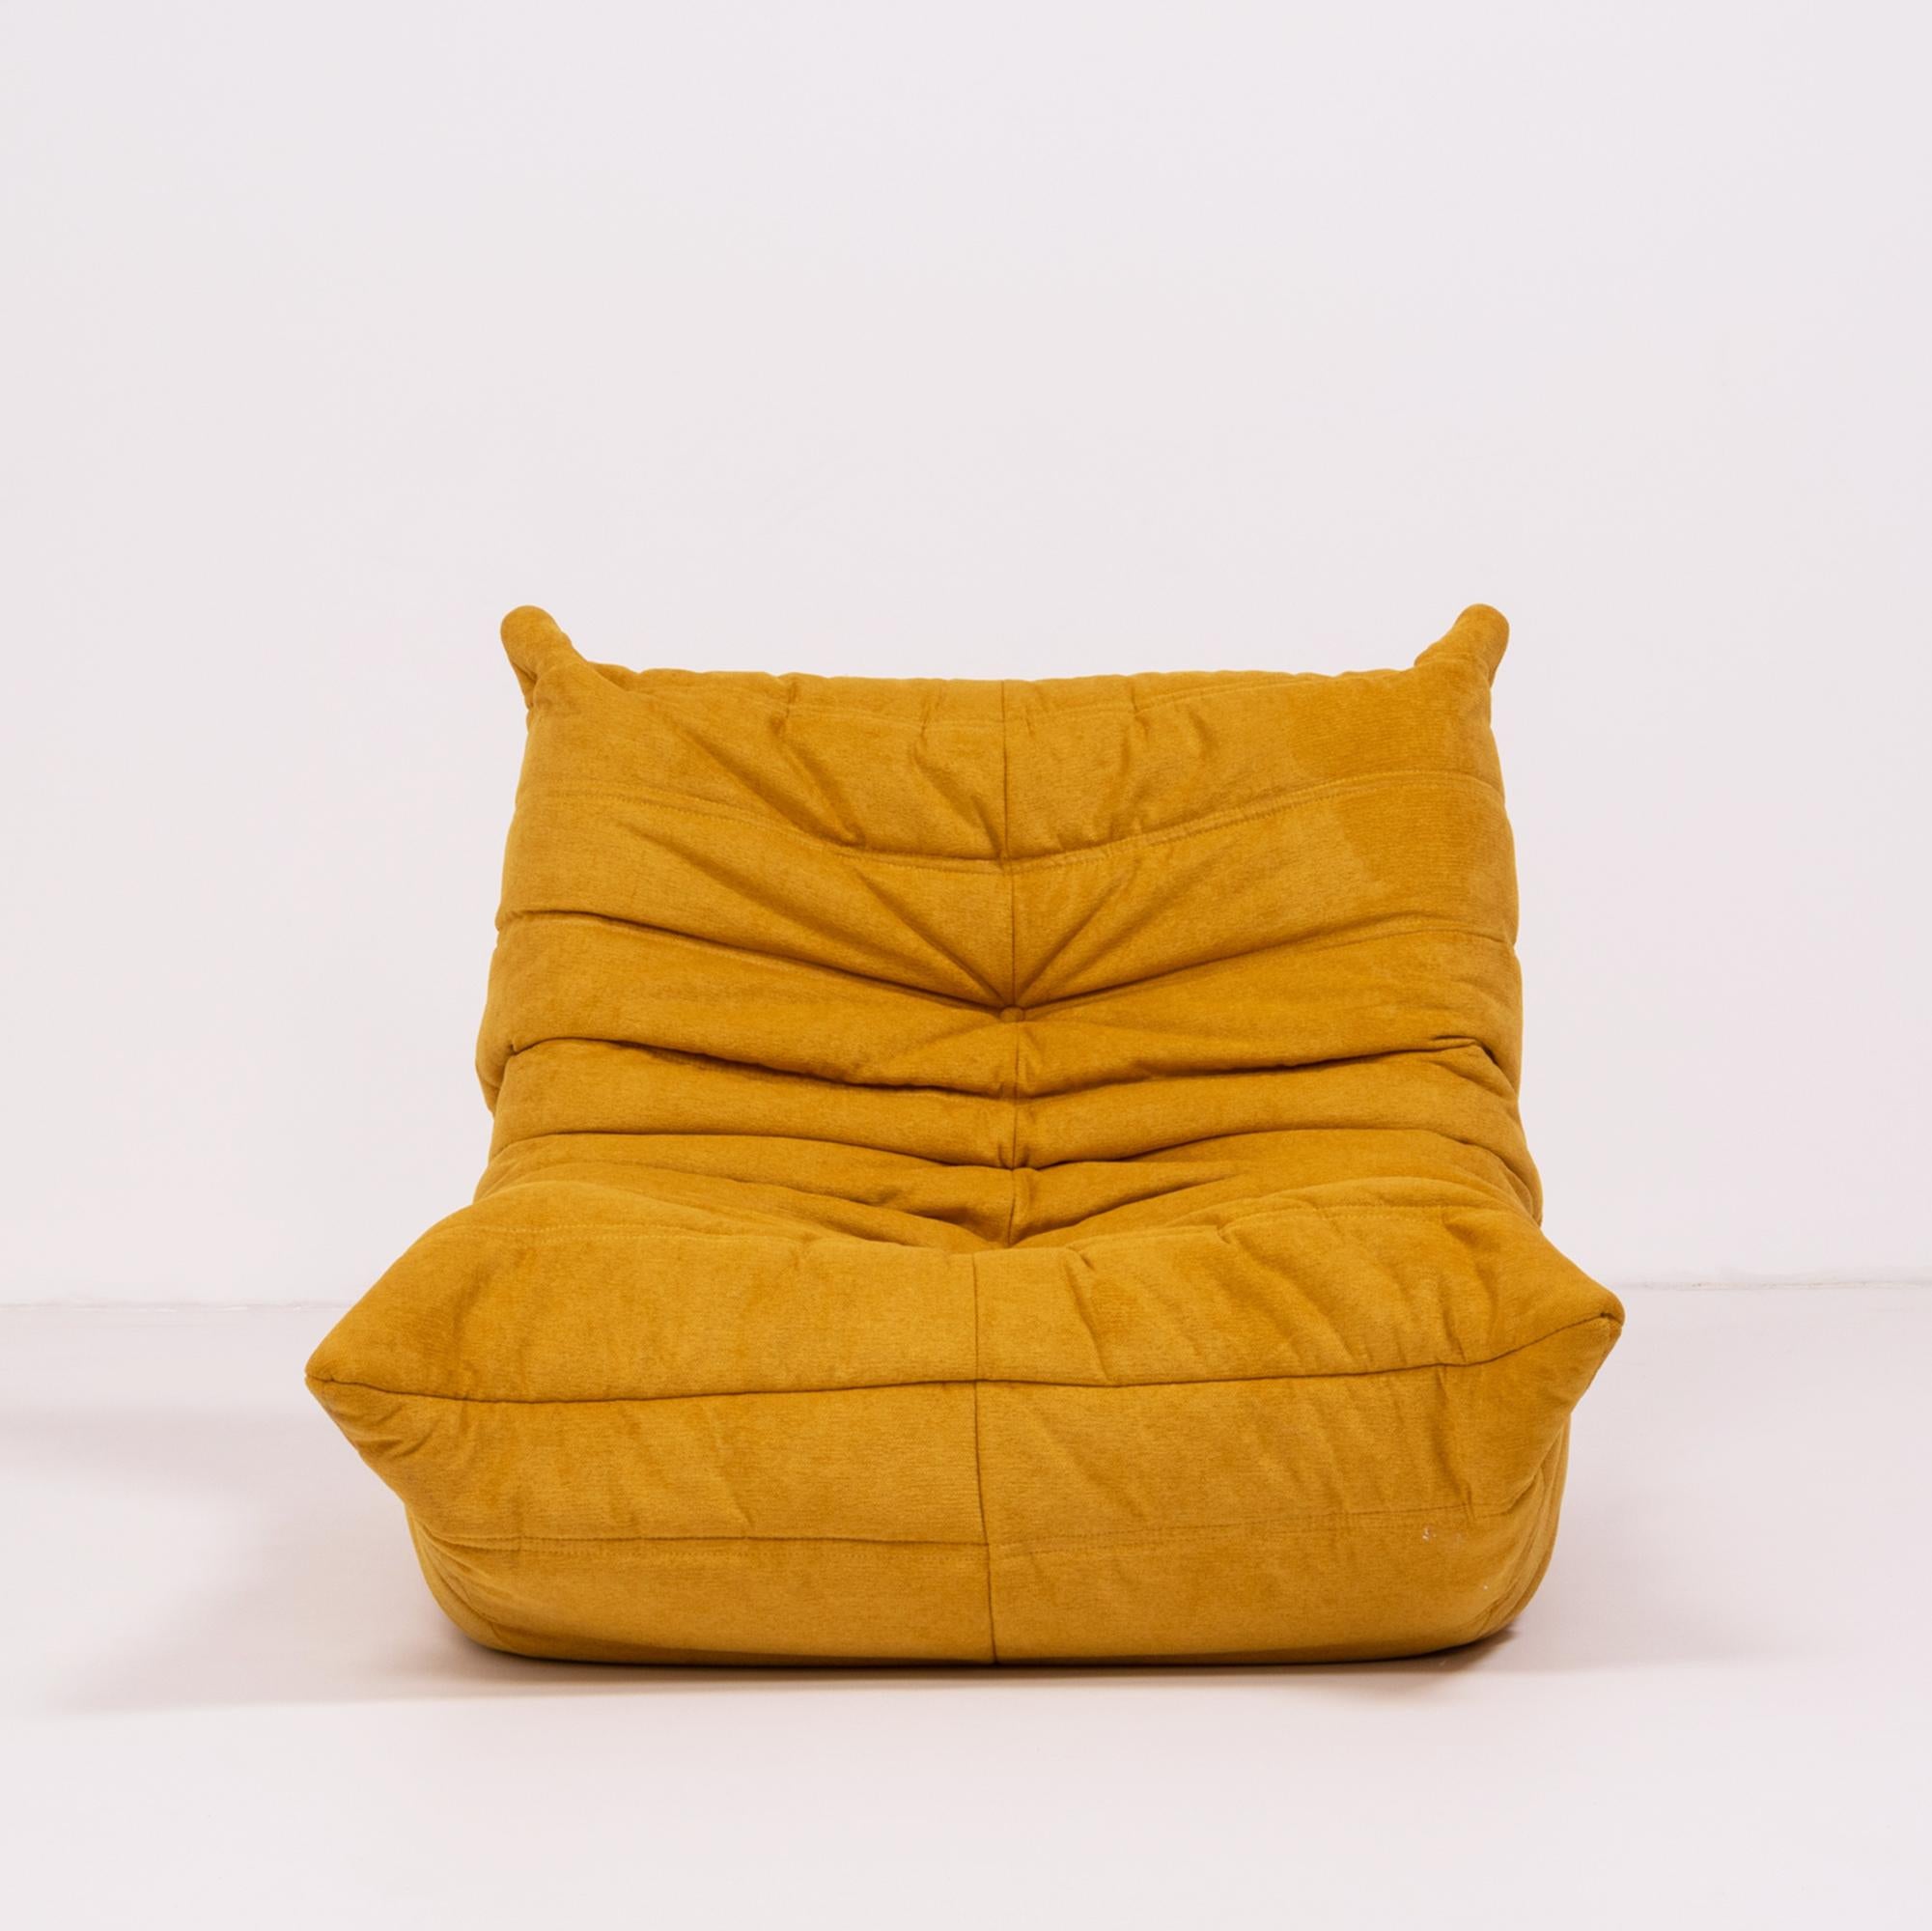 The iconic Togo range, originally designed by Michael Ducaroy for Ligne Roset in 1973, has become a design classic.
 
This fireside chair model has been newly and completely reupholstered in marigold yellow Liberto fabric which can be spot cleaned